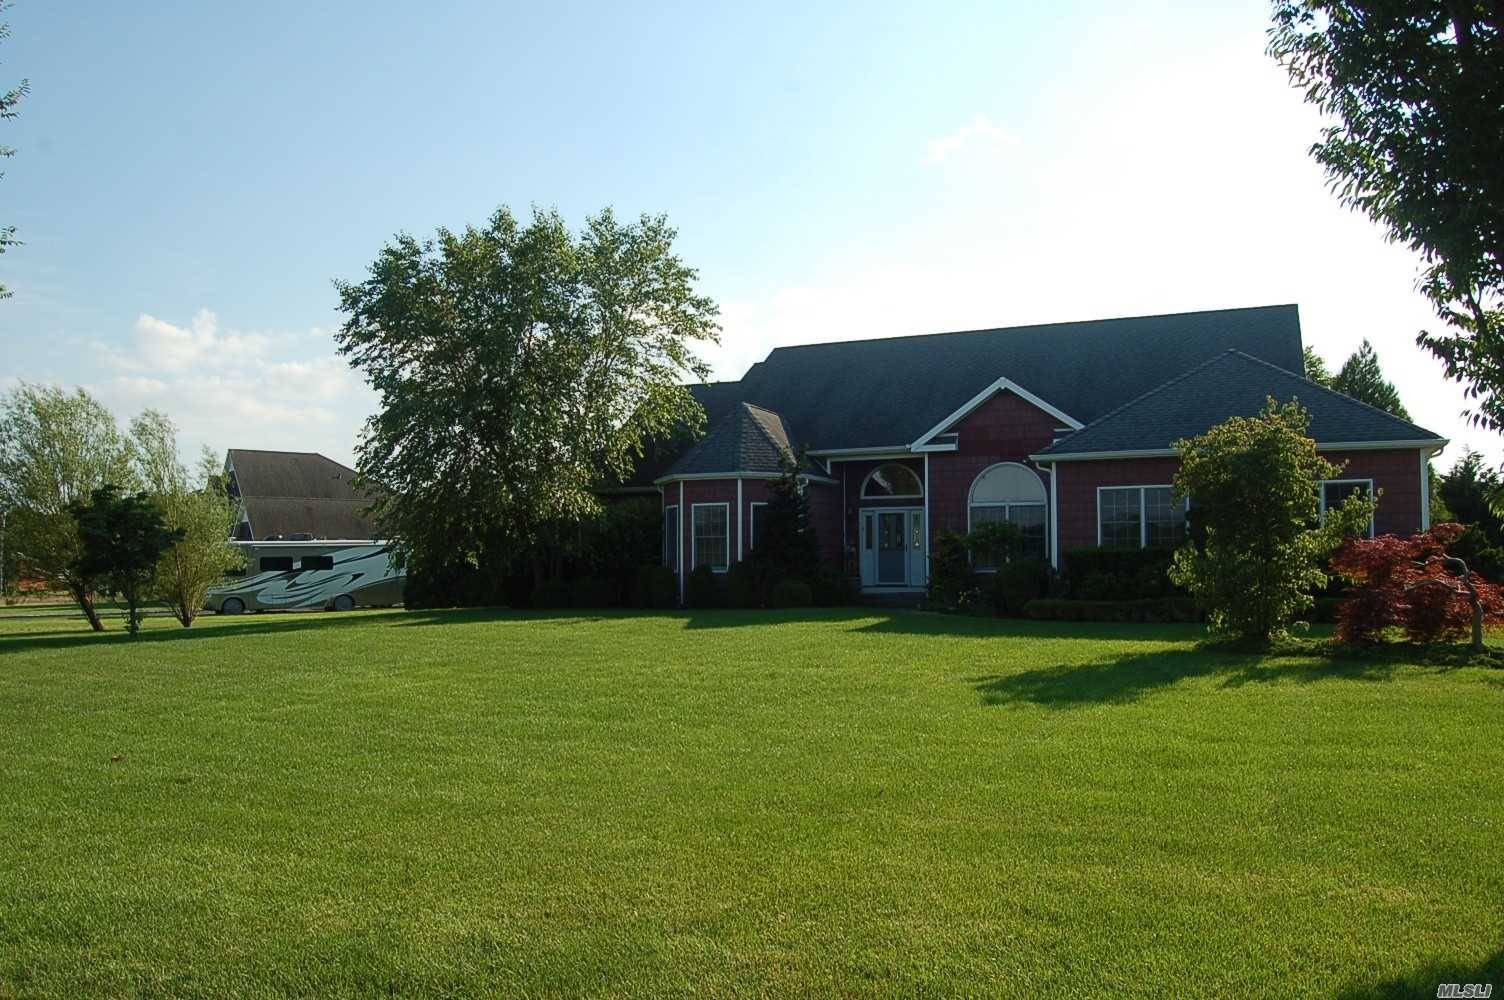 This Post modern ranch is located on 1 acre next to horse farm.